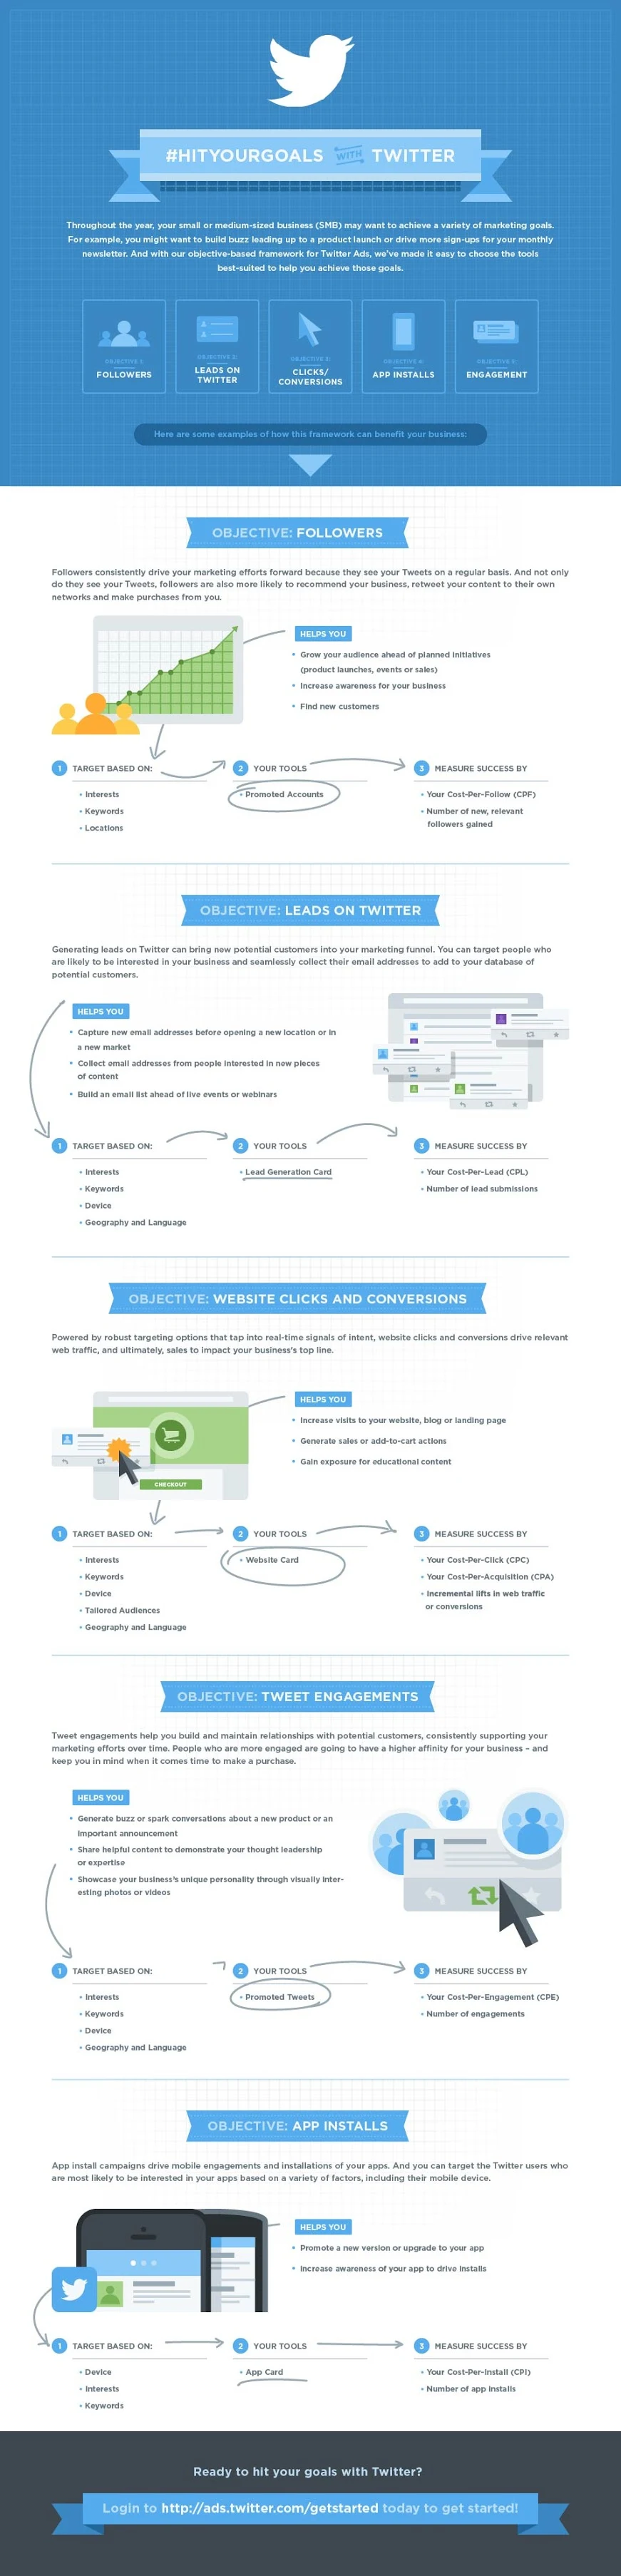 Hitting Your Marketing Goals With Twitter - #infographic #SocialMedia #Twitter - How to make successful online campaigns with Twitter